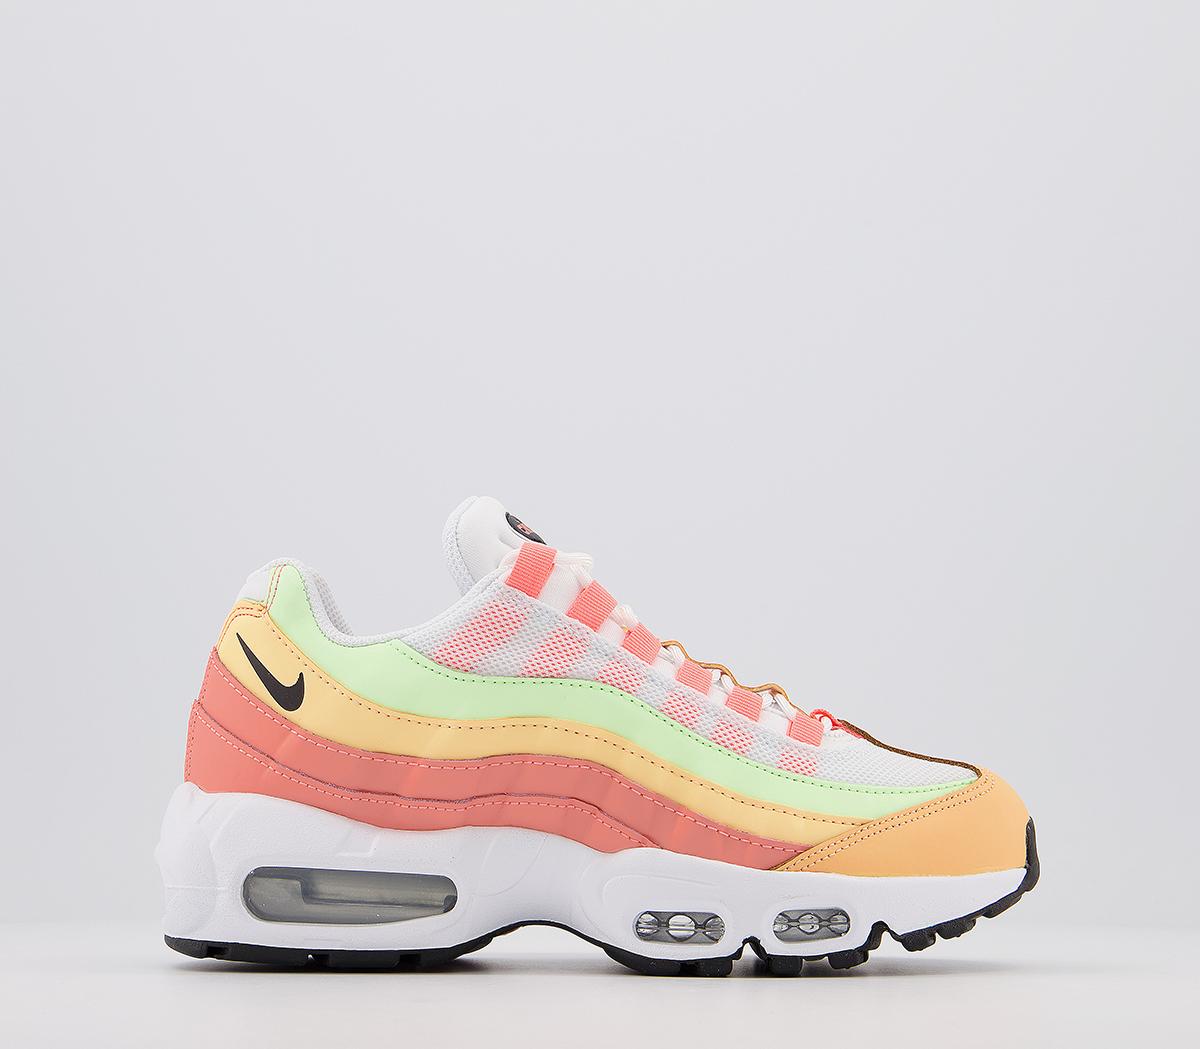 Nike Air Max 95 Trainers Atomic Pink Melon Tint - Unisex Sports